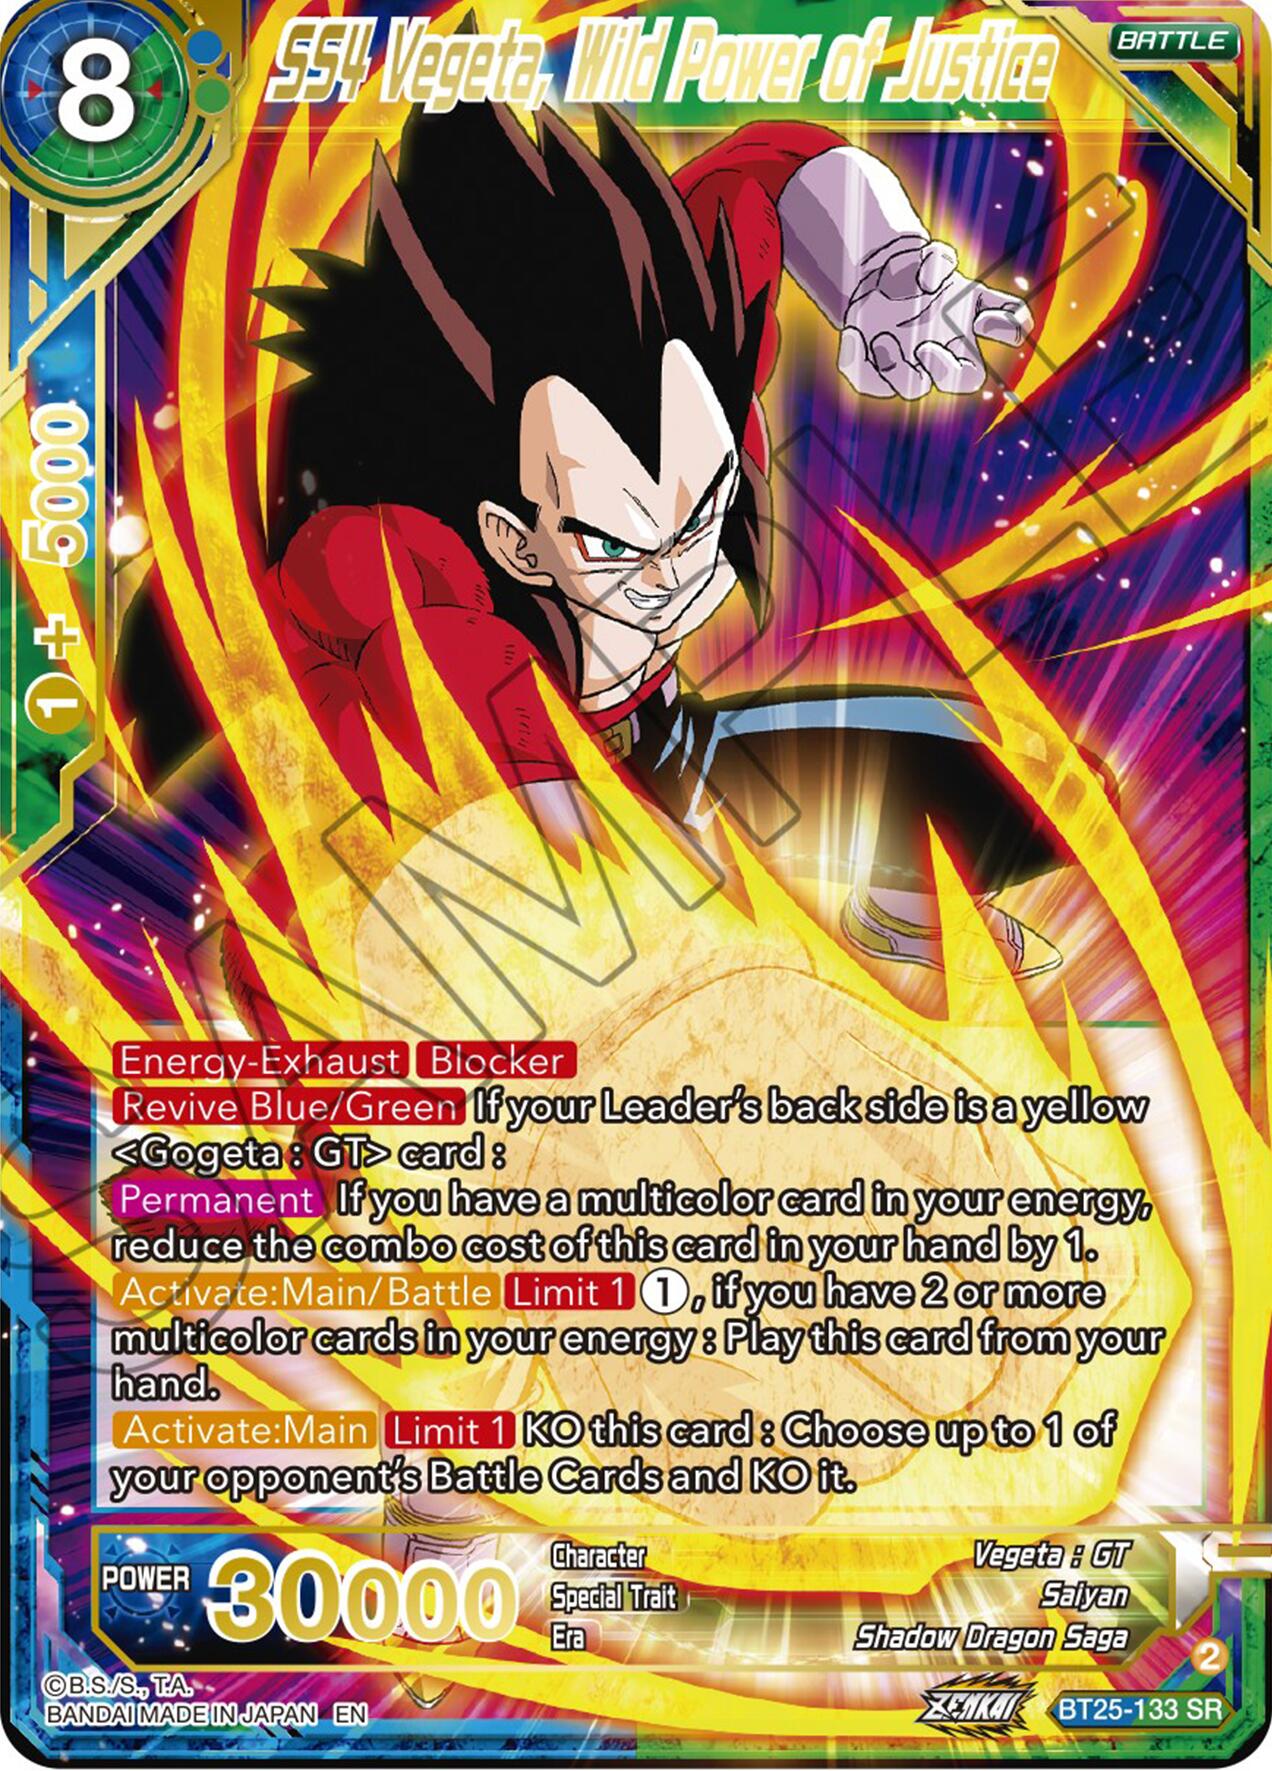 SS4 Vegeta, Wild Power of Justice (BT25-133) [Legend of the Dragon Balls] | North Valley Games